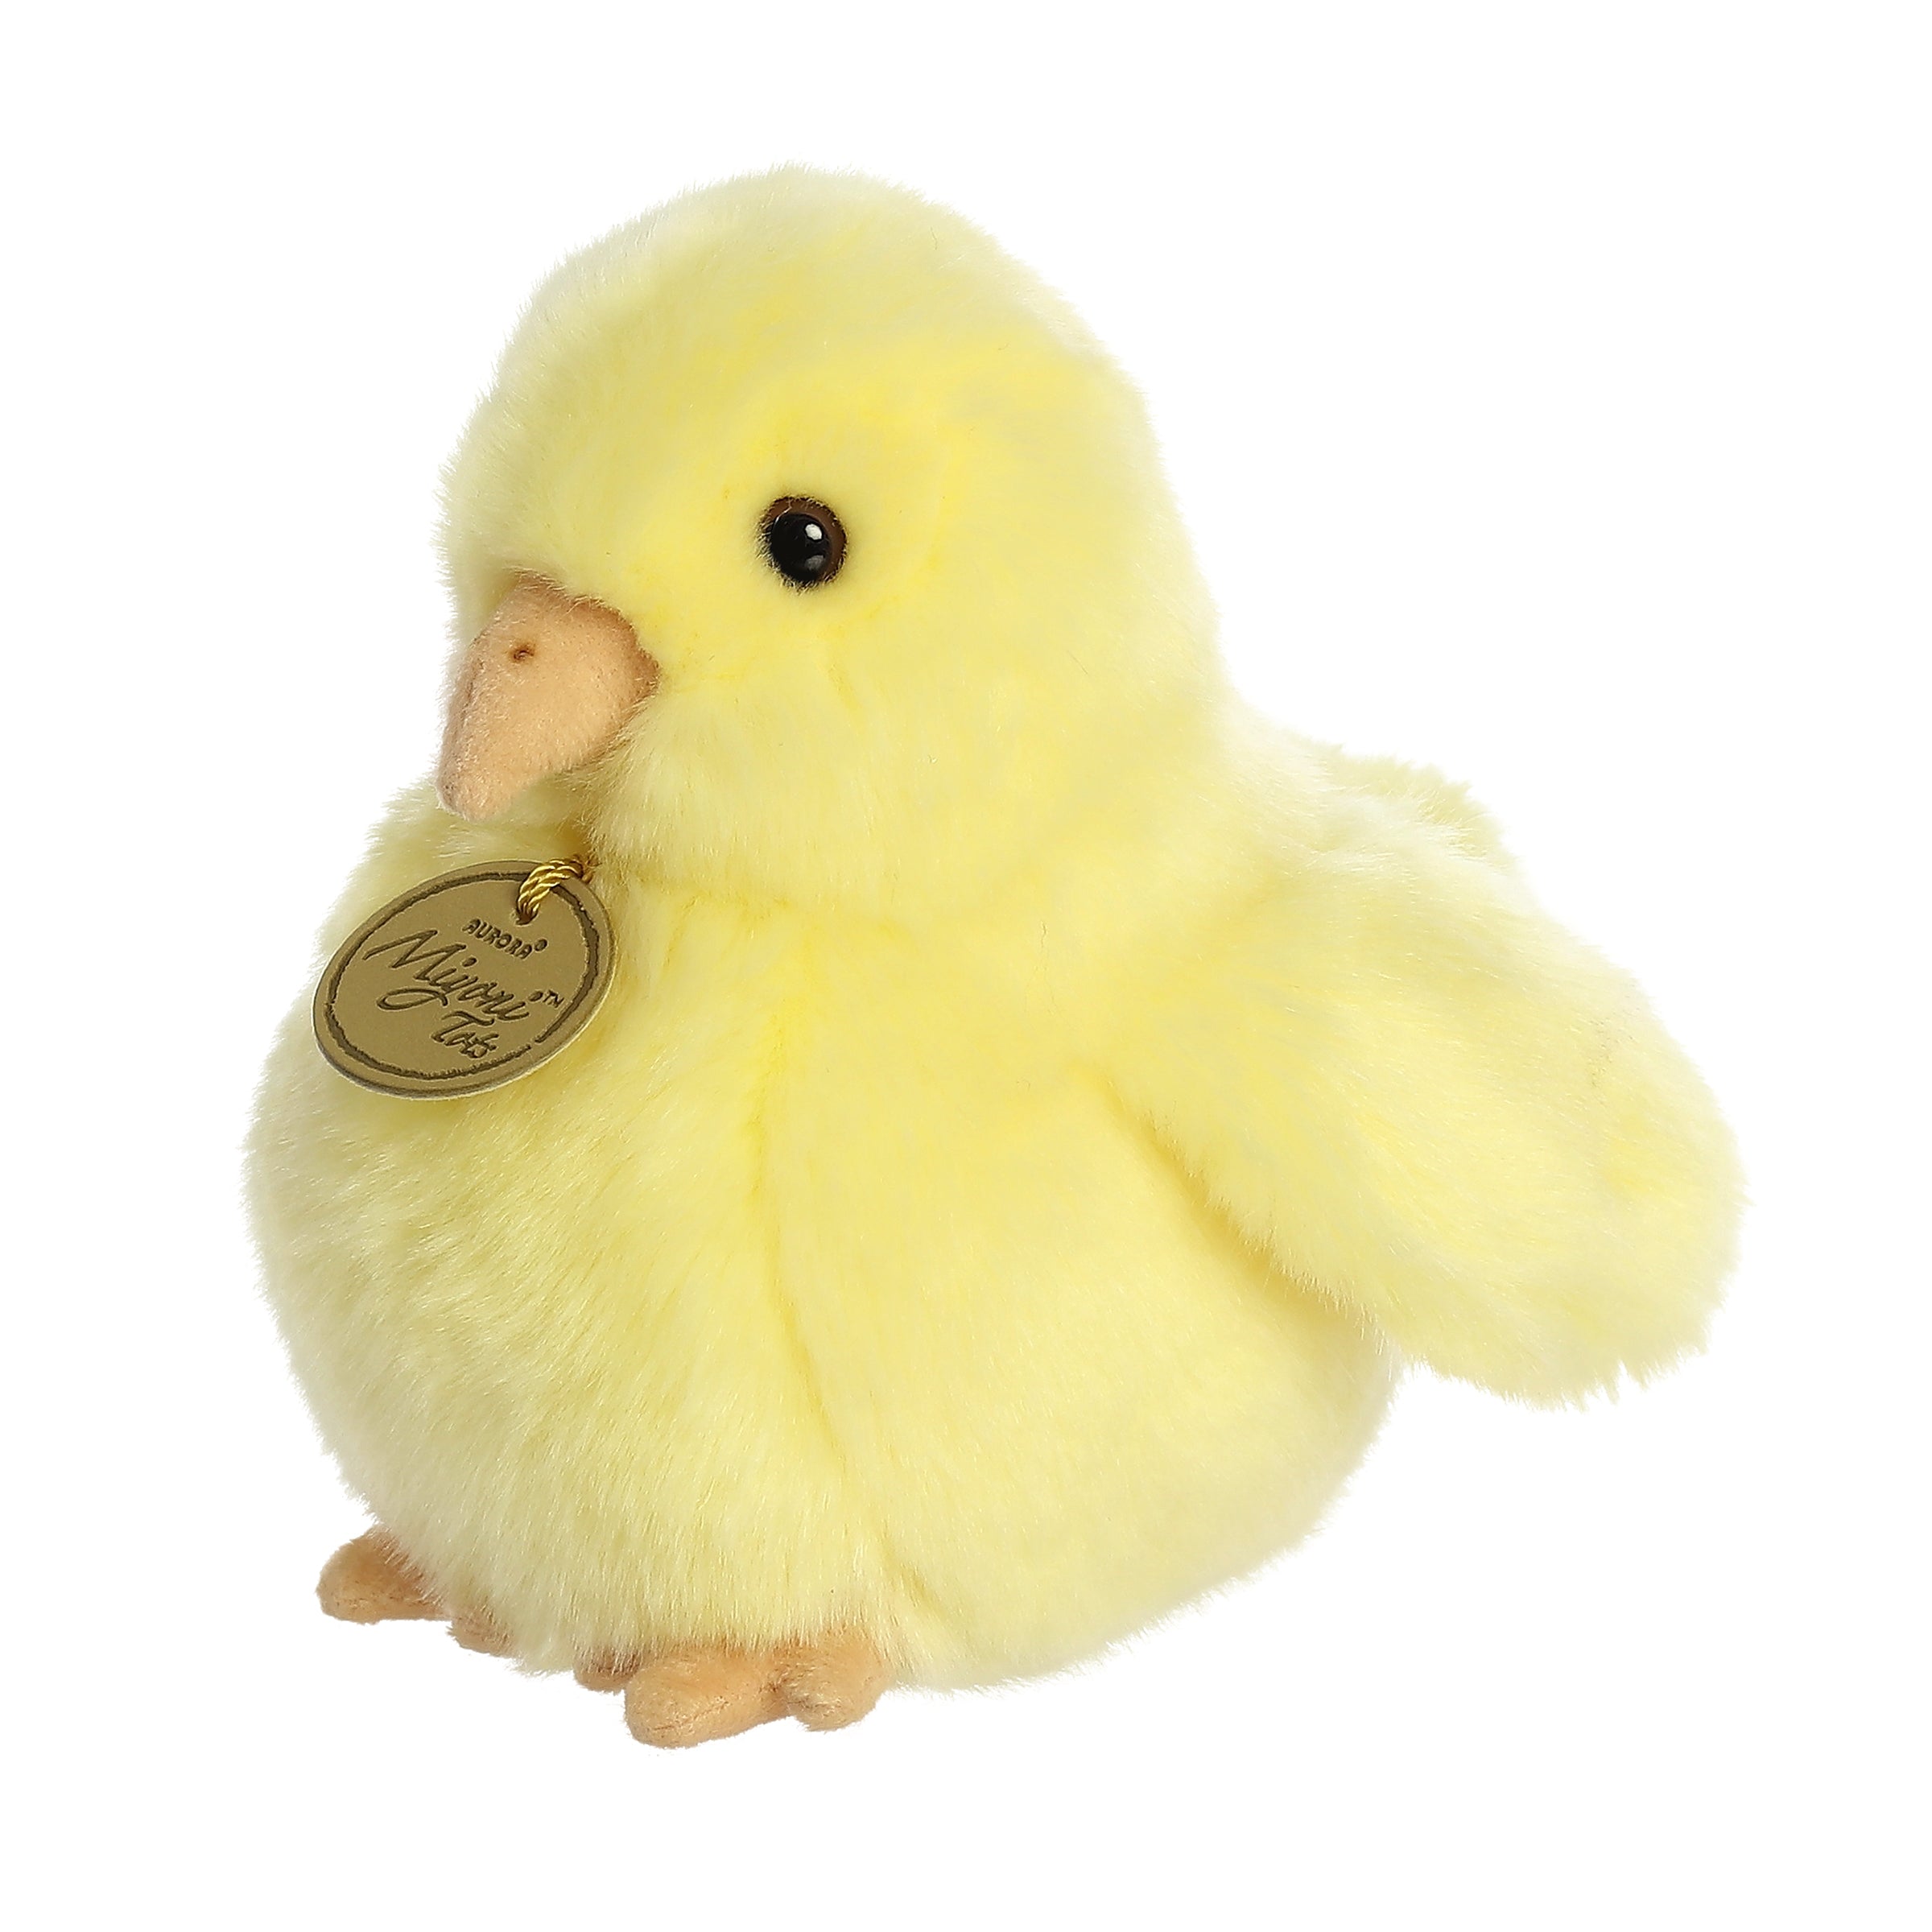 Miyoni Tots Tender Chick Plush from Aurora, in vibrant yellow, eco-friendly and realistic